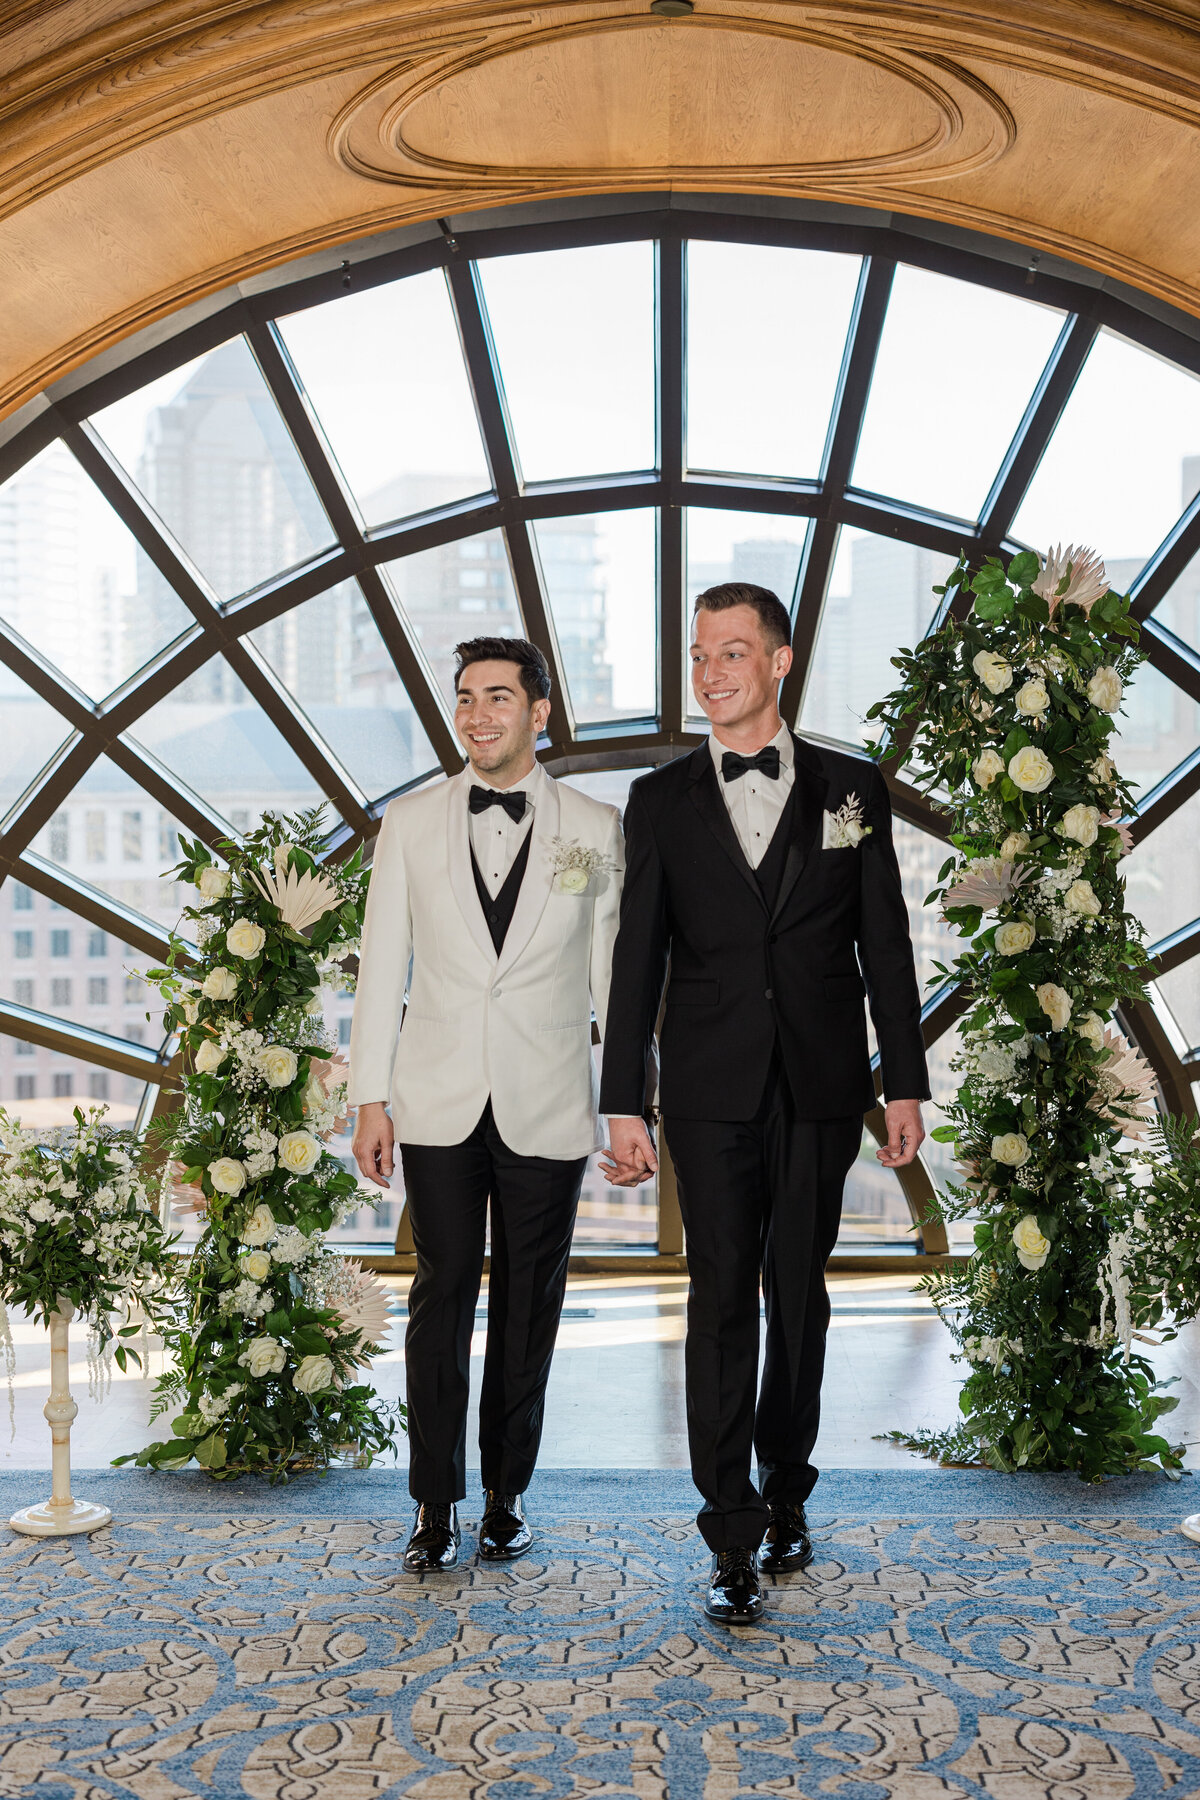 A portrait of two grooms on their wedding day at The Crescent Club in Dallas, Texas. The groom on the left is wearing a tuxedo with a white jacket, black bowtie, and boutonniere. The groom on the left is wearing an all black tuxedo with a bowtie and a boutonniere. They both hold hands while walking down the aisle towards the camera. They are flanked by intricate and large floral arrangements on either side.